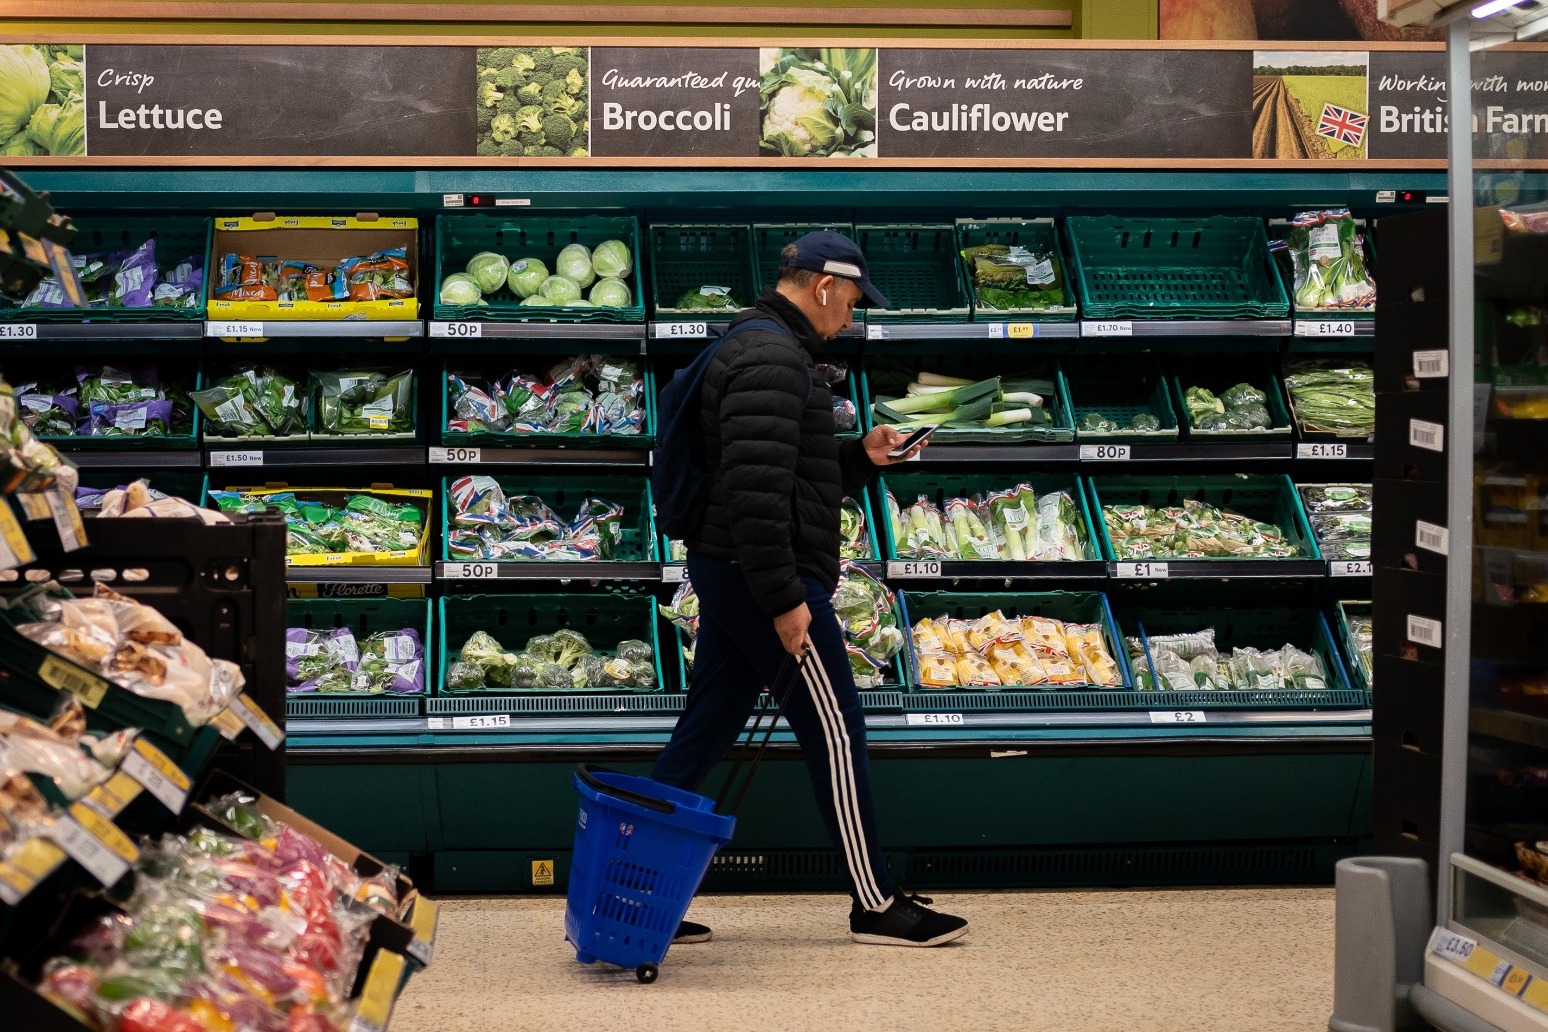 UK inflation shoots up unexpectedly as vegetable shortages push up food prices 